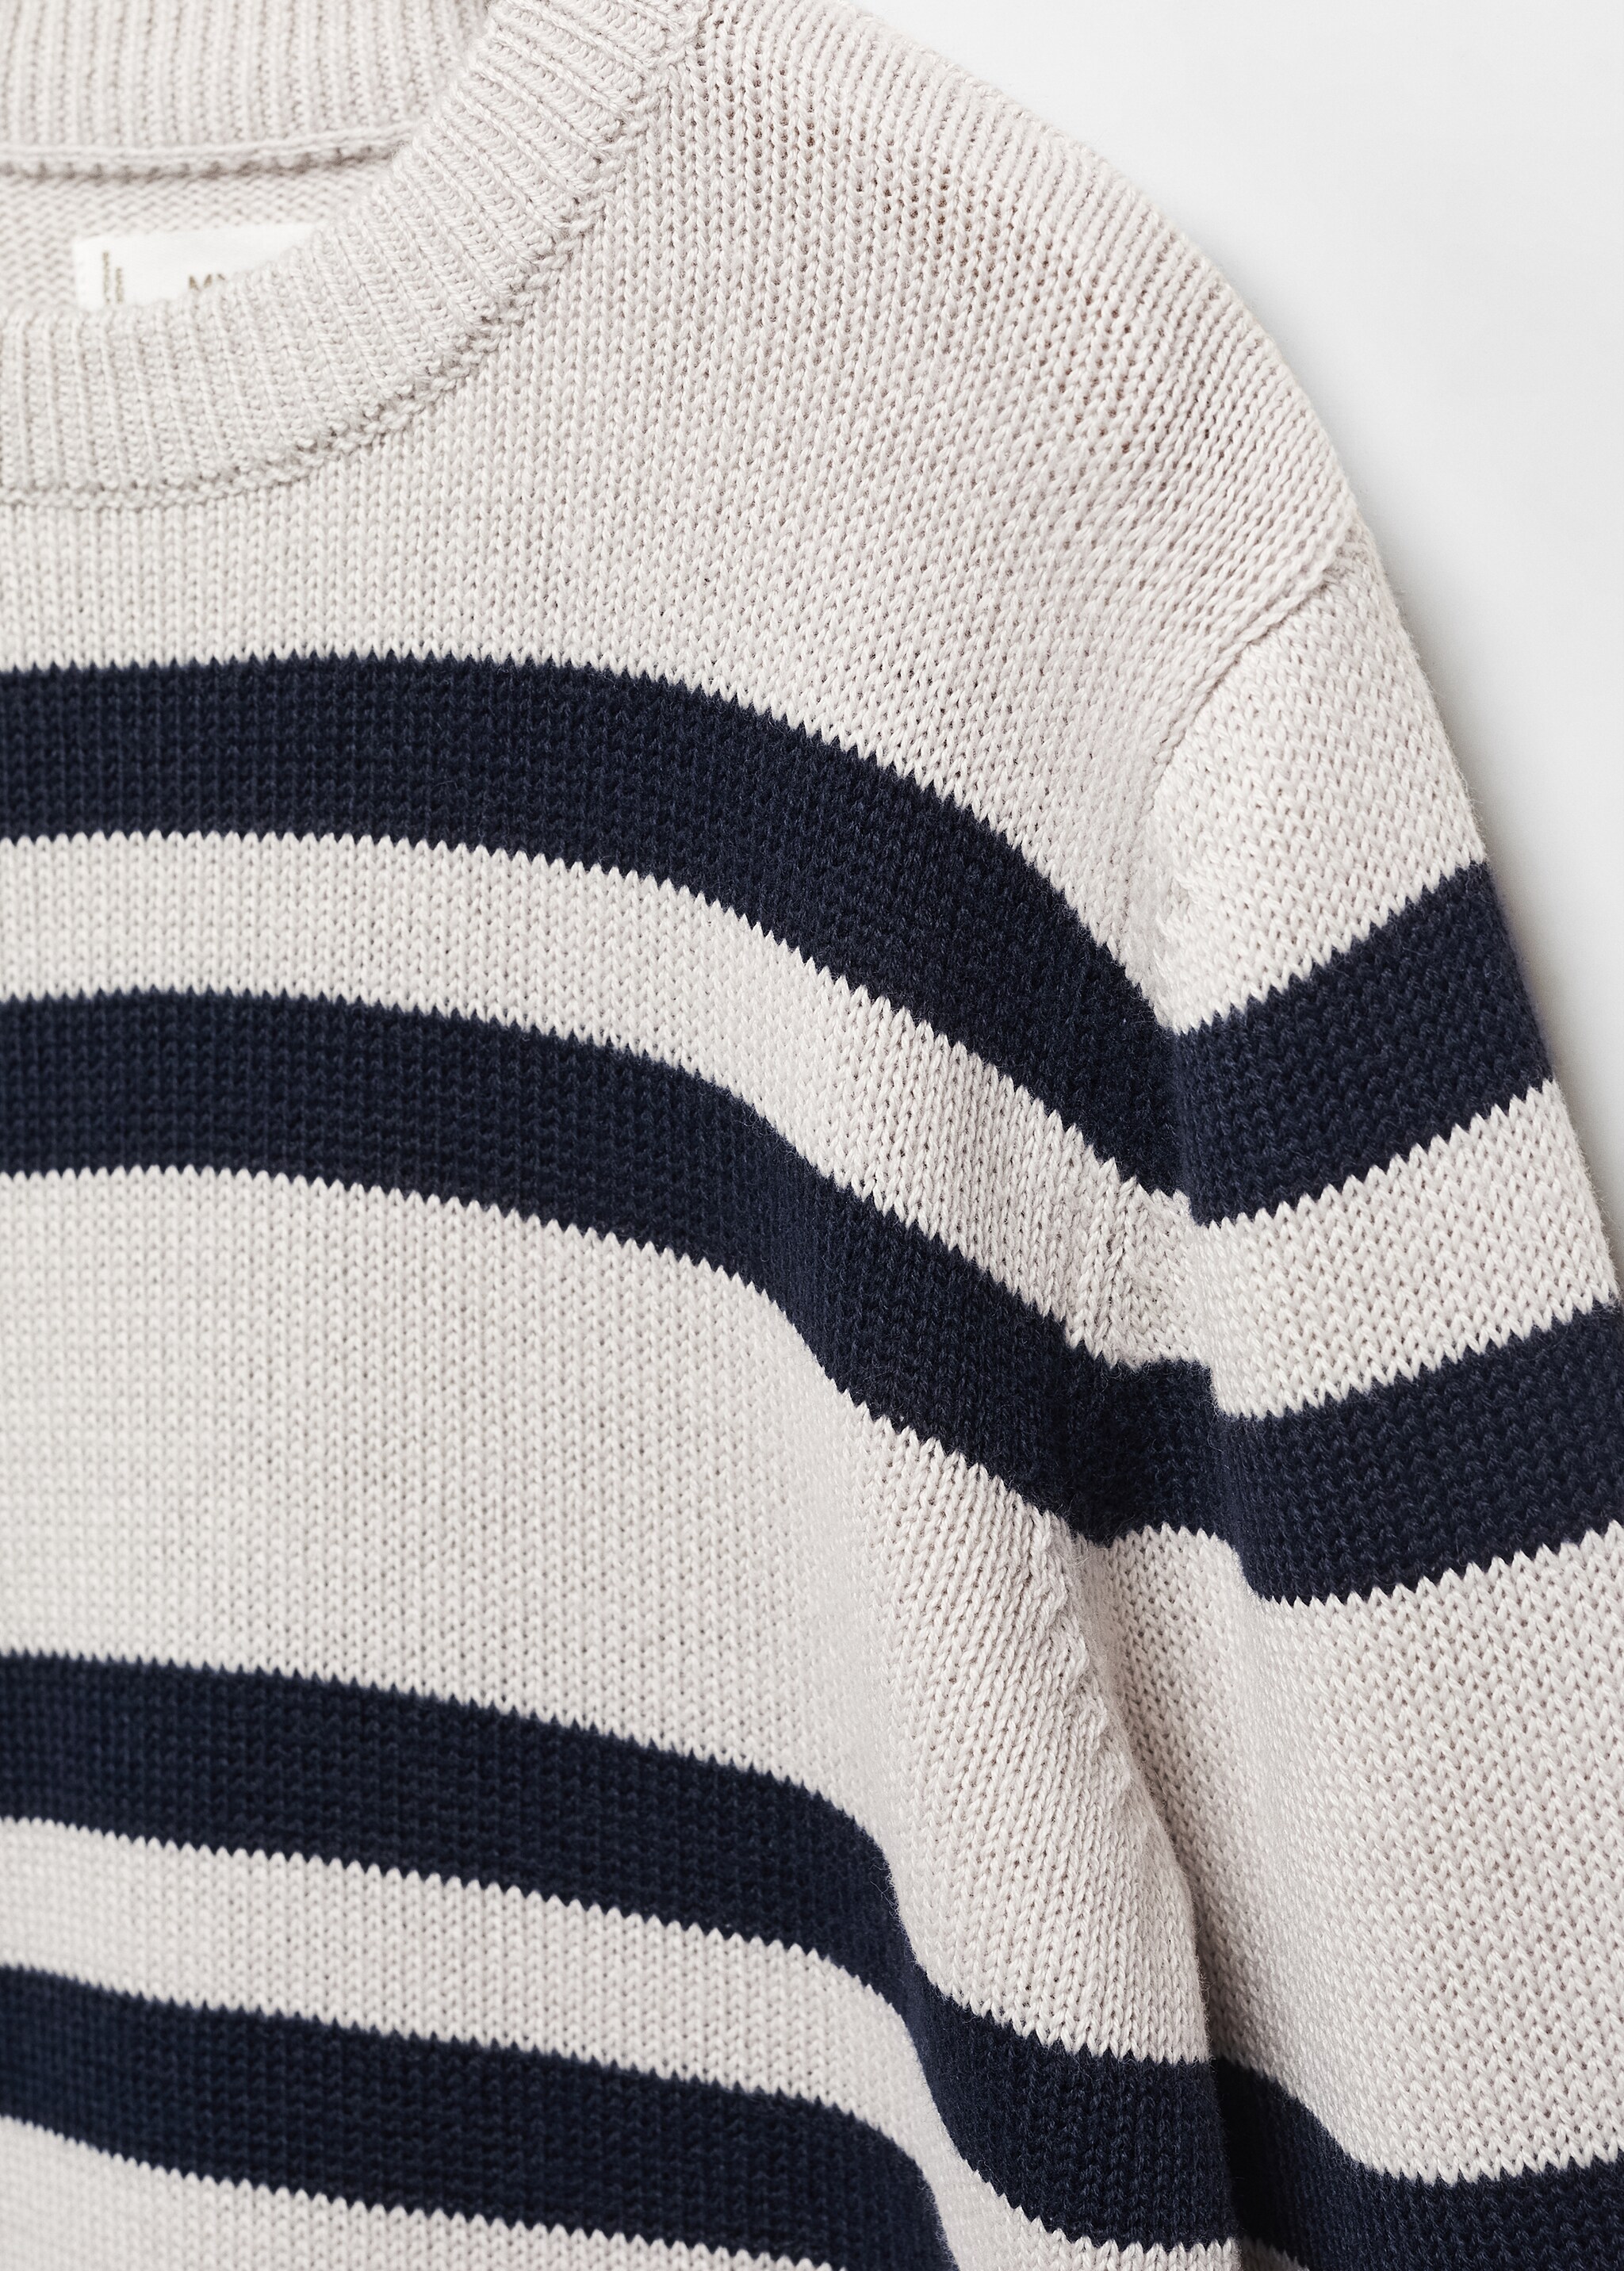 Striped knit sweater - Details of the article 8